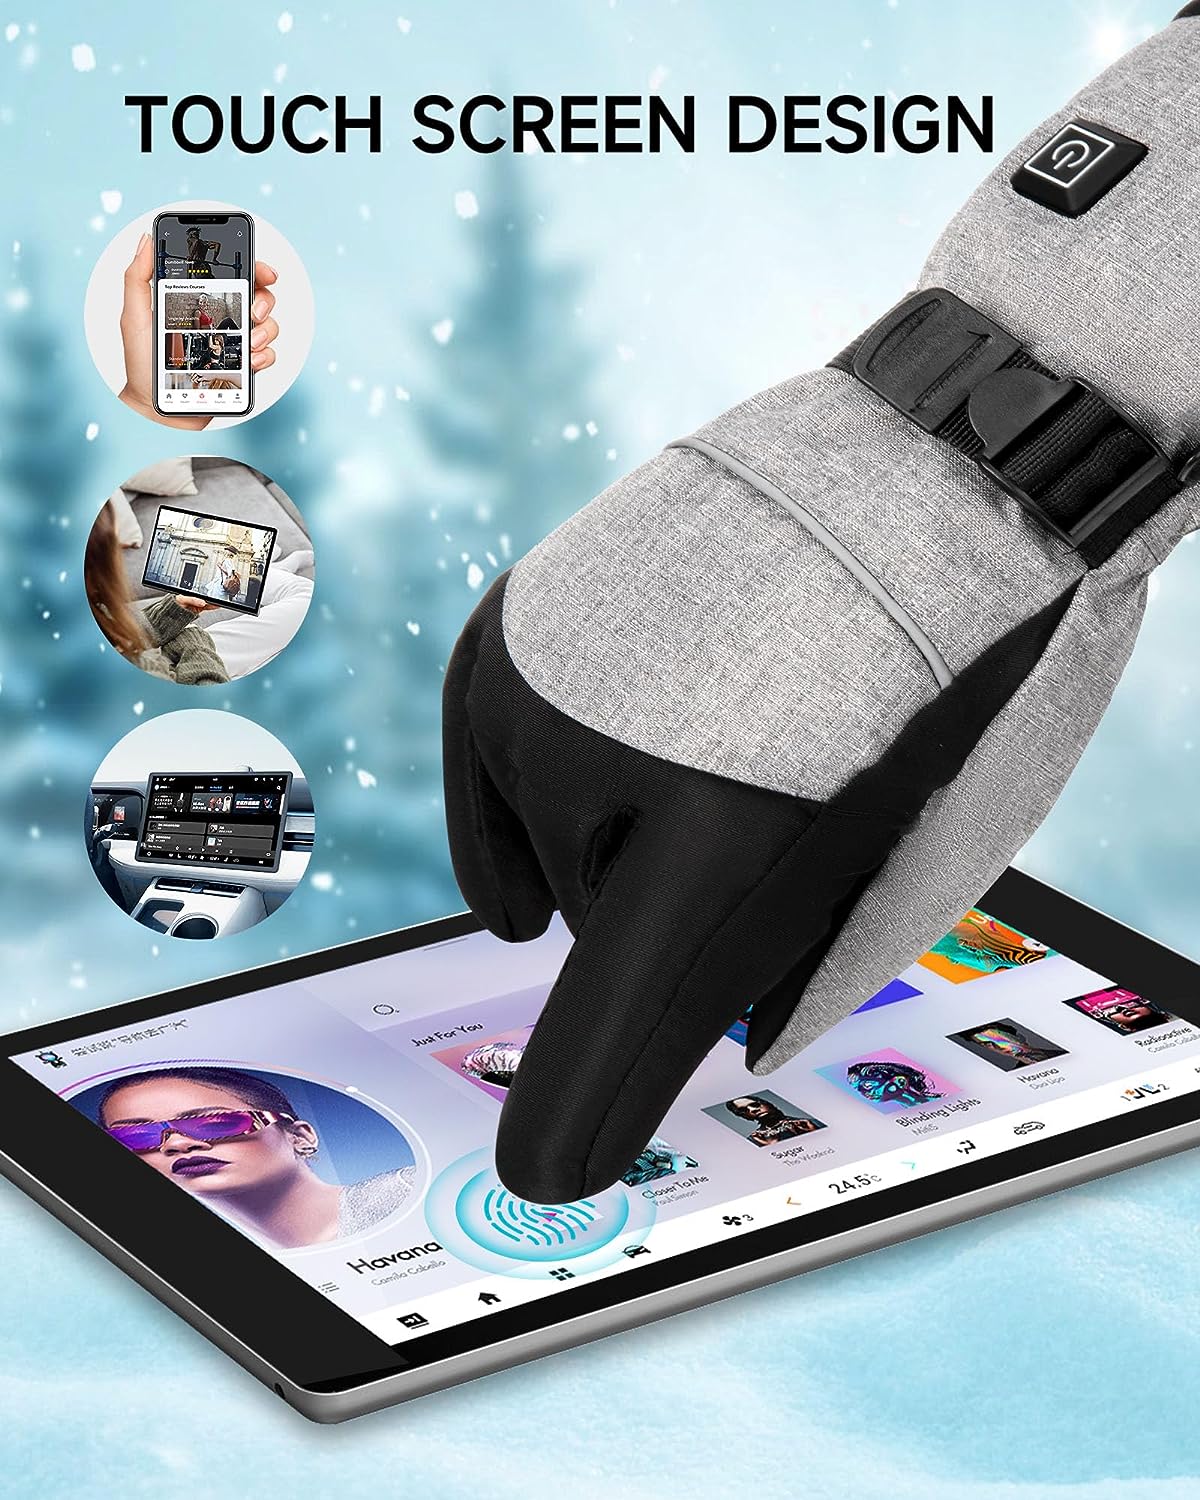 ALLJOY Rechargeable Heated Gloves